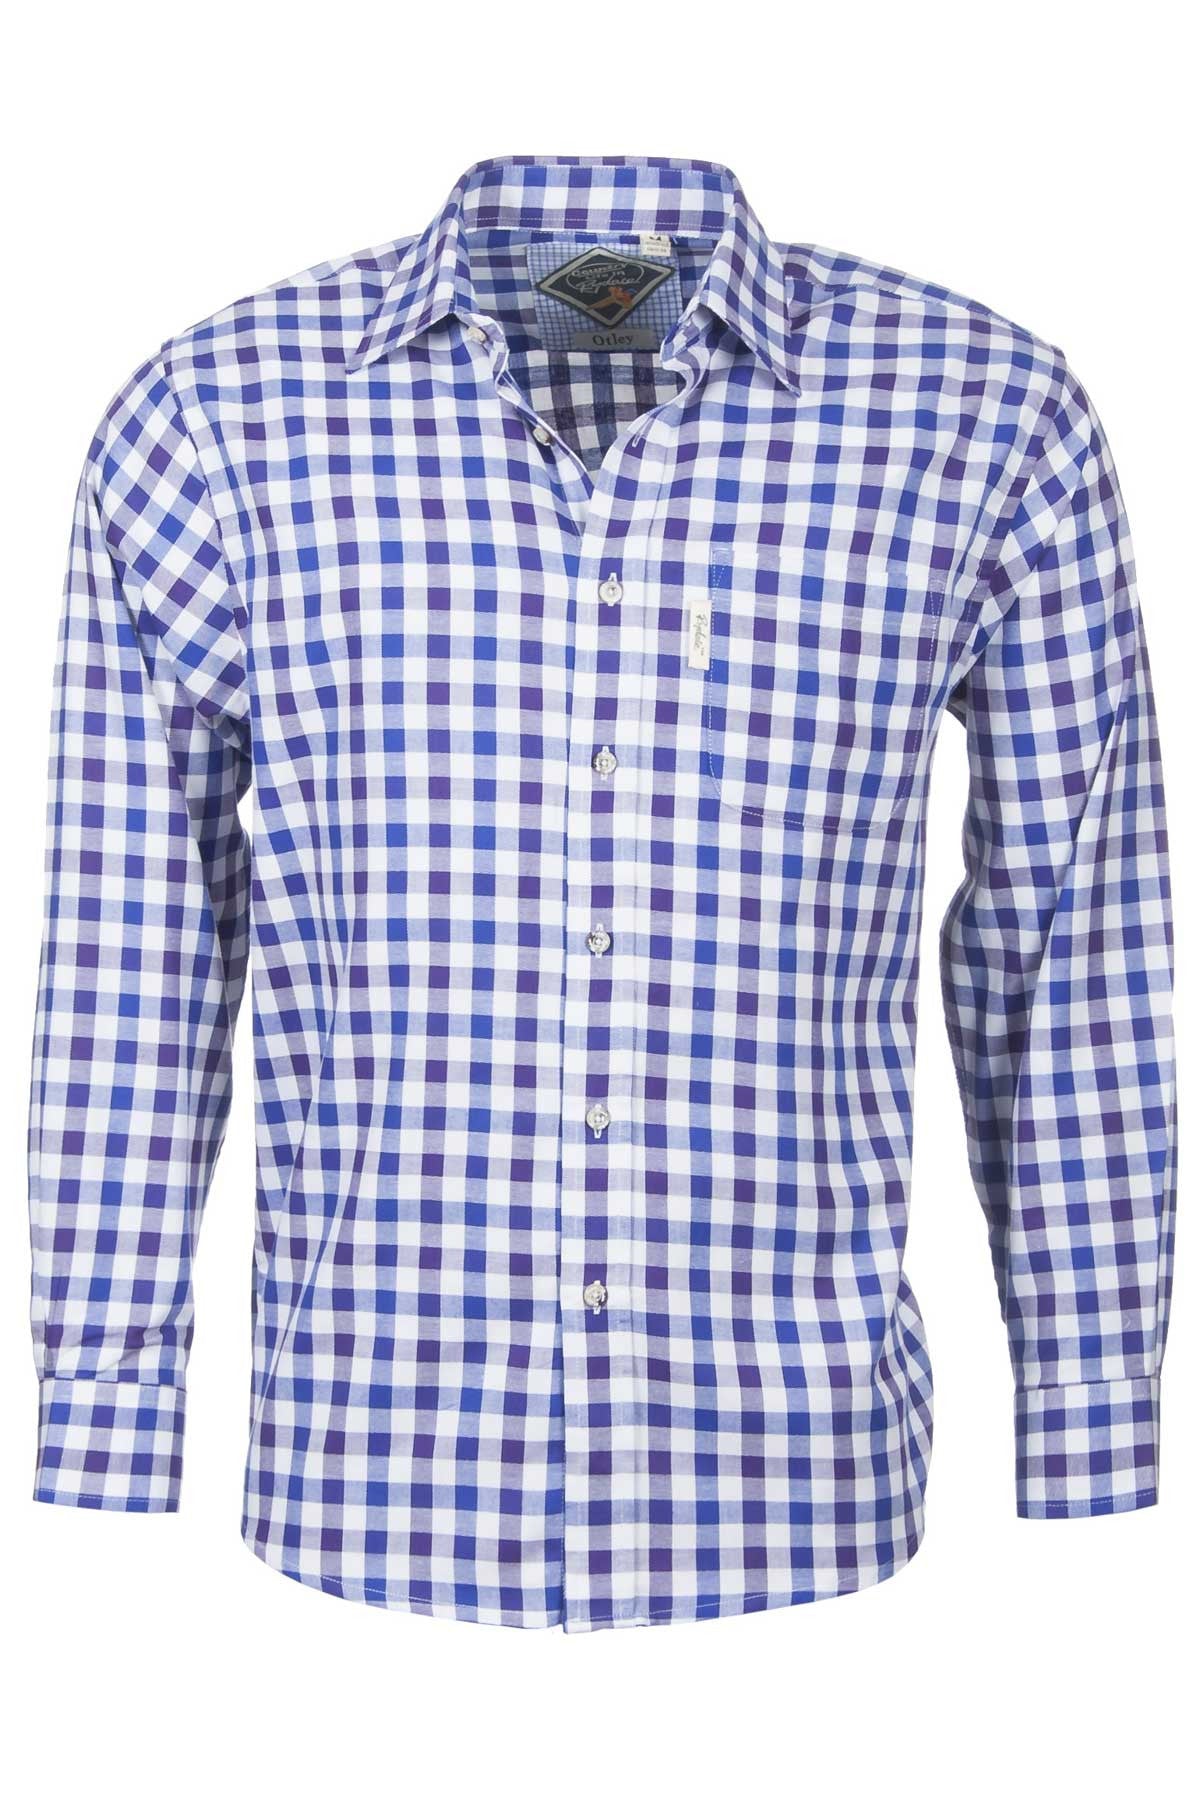 Mens 100% Cotton Country Check Shirts UK | Rydale